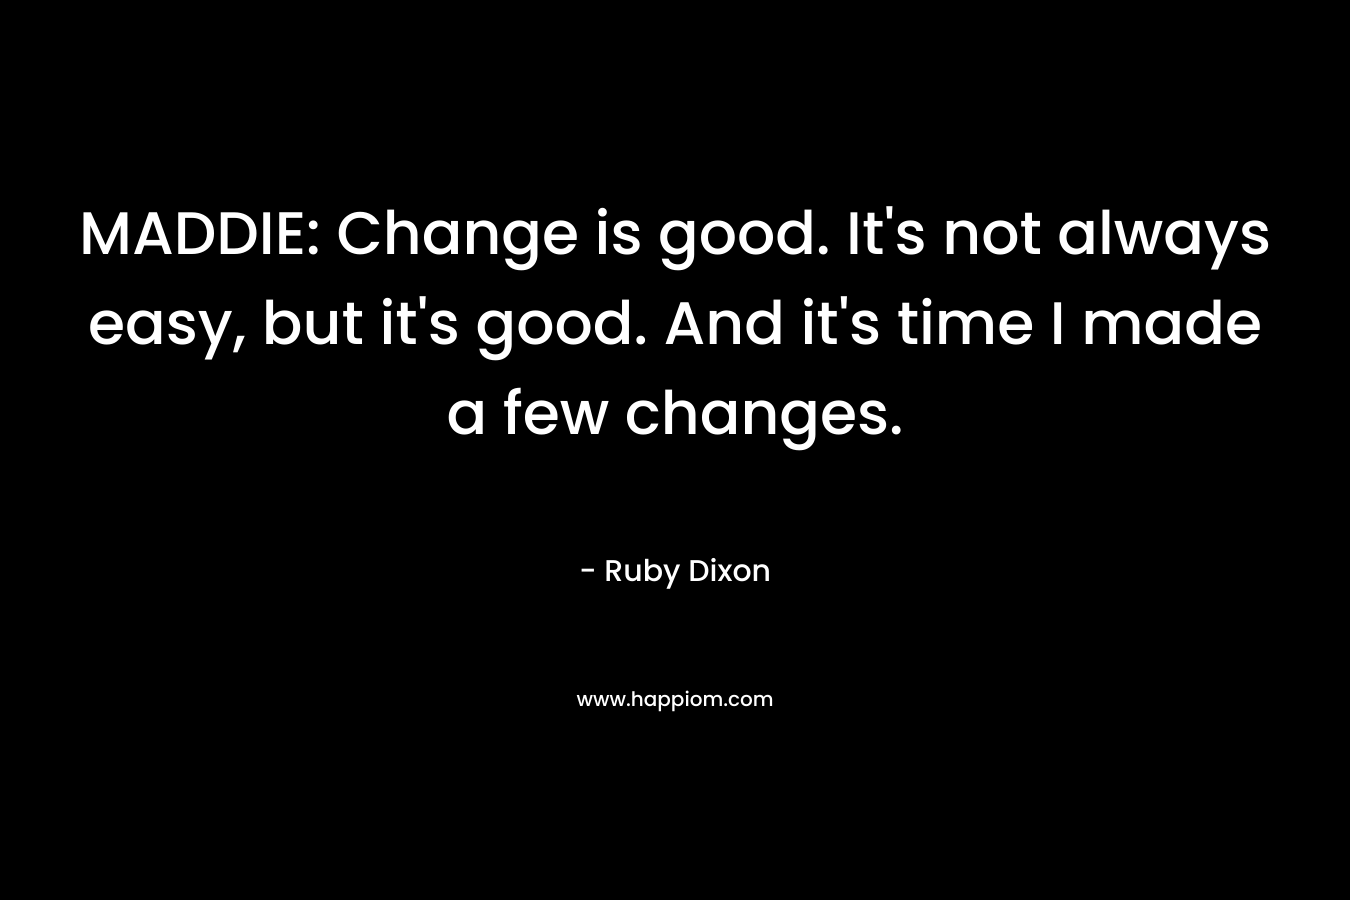 MADDIE: Change is good. It’s not always easy, but it’s good. And it’s time I made a few changes. – Ruby Dixon